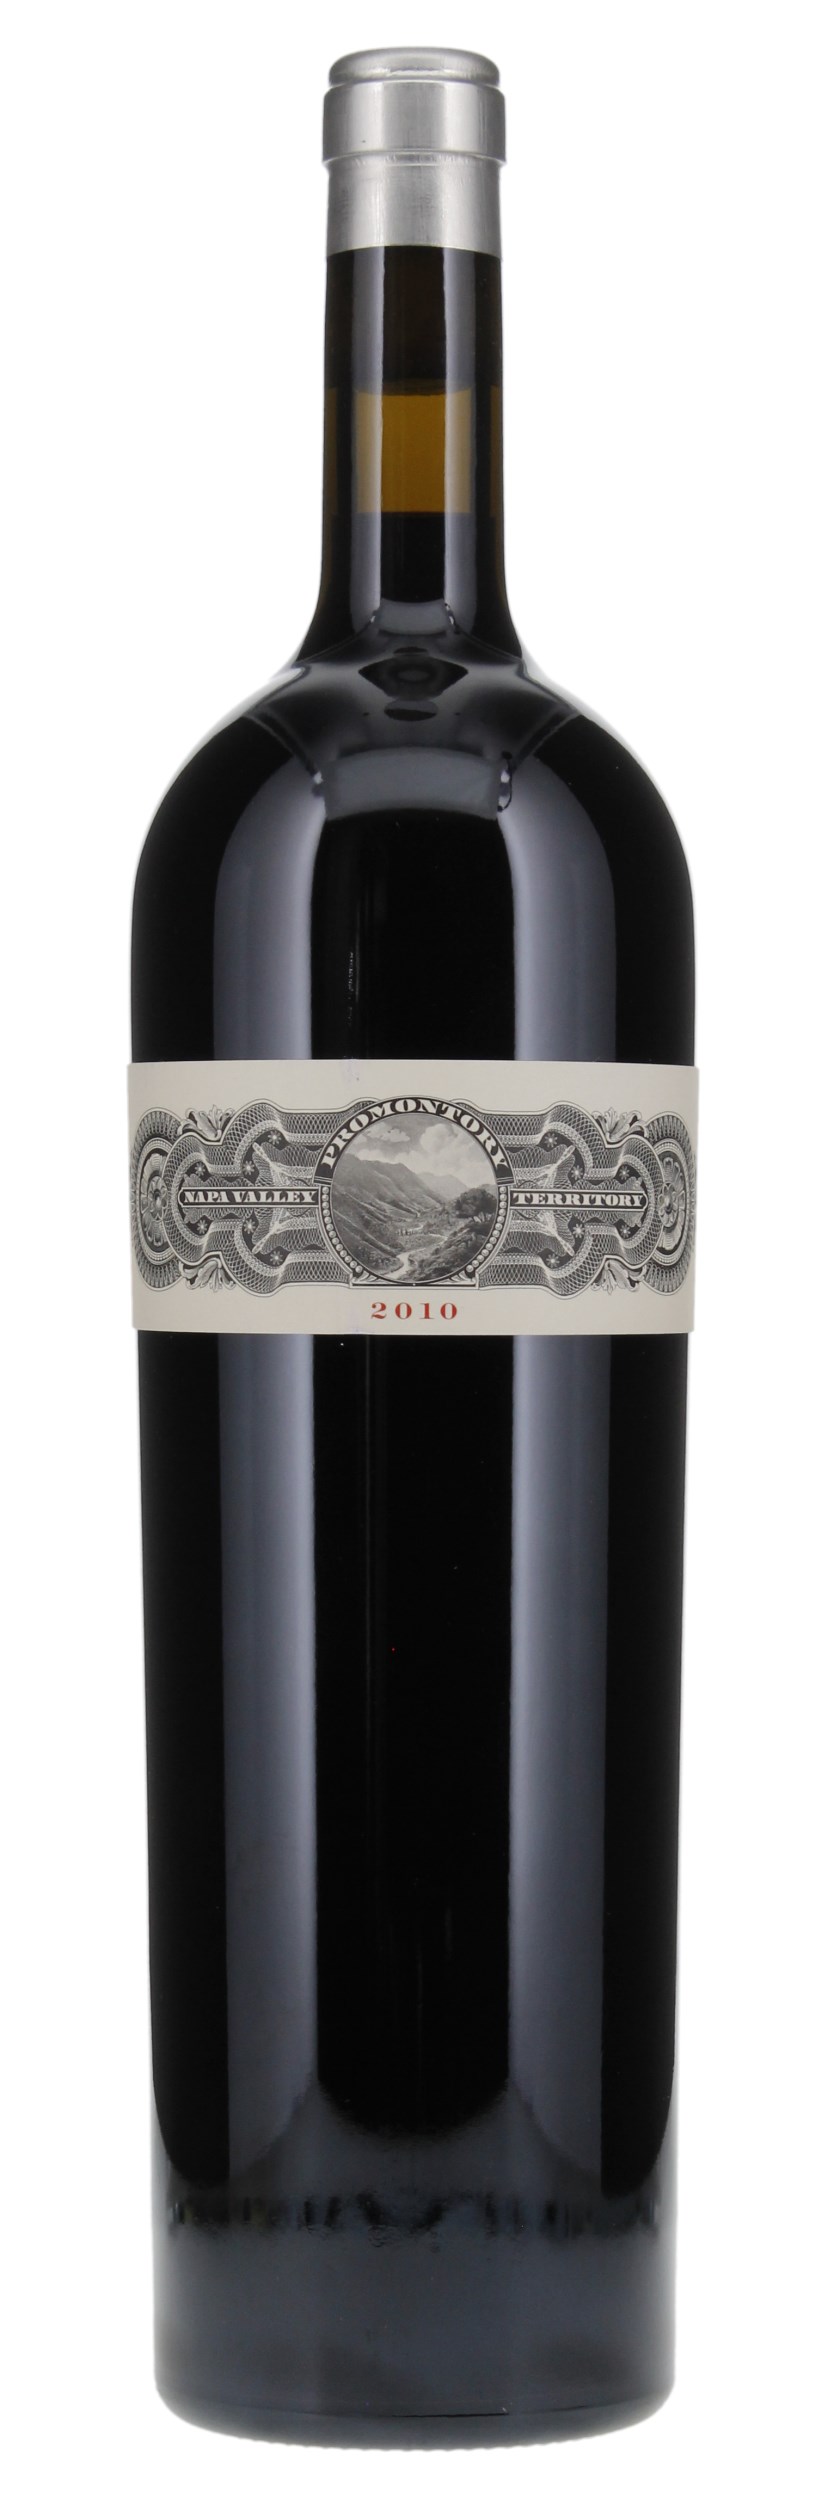 2010 Promontory Red, 1.5ltr